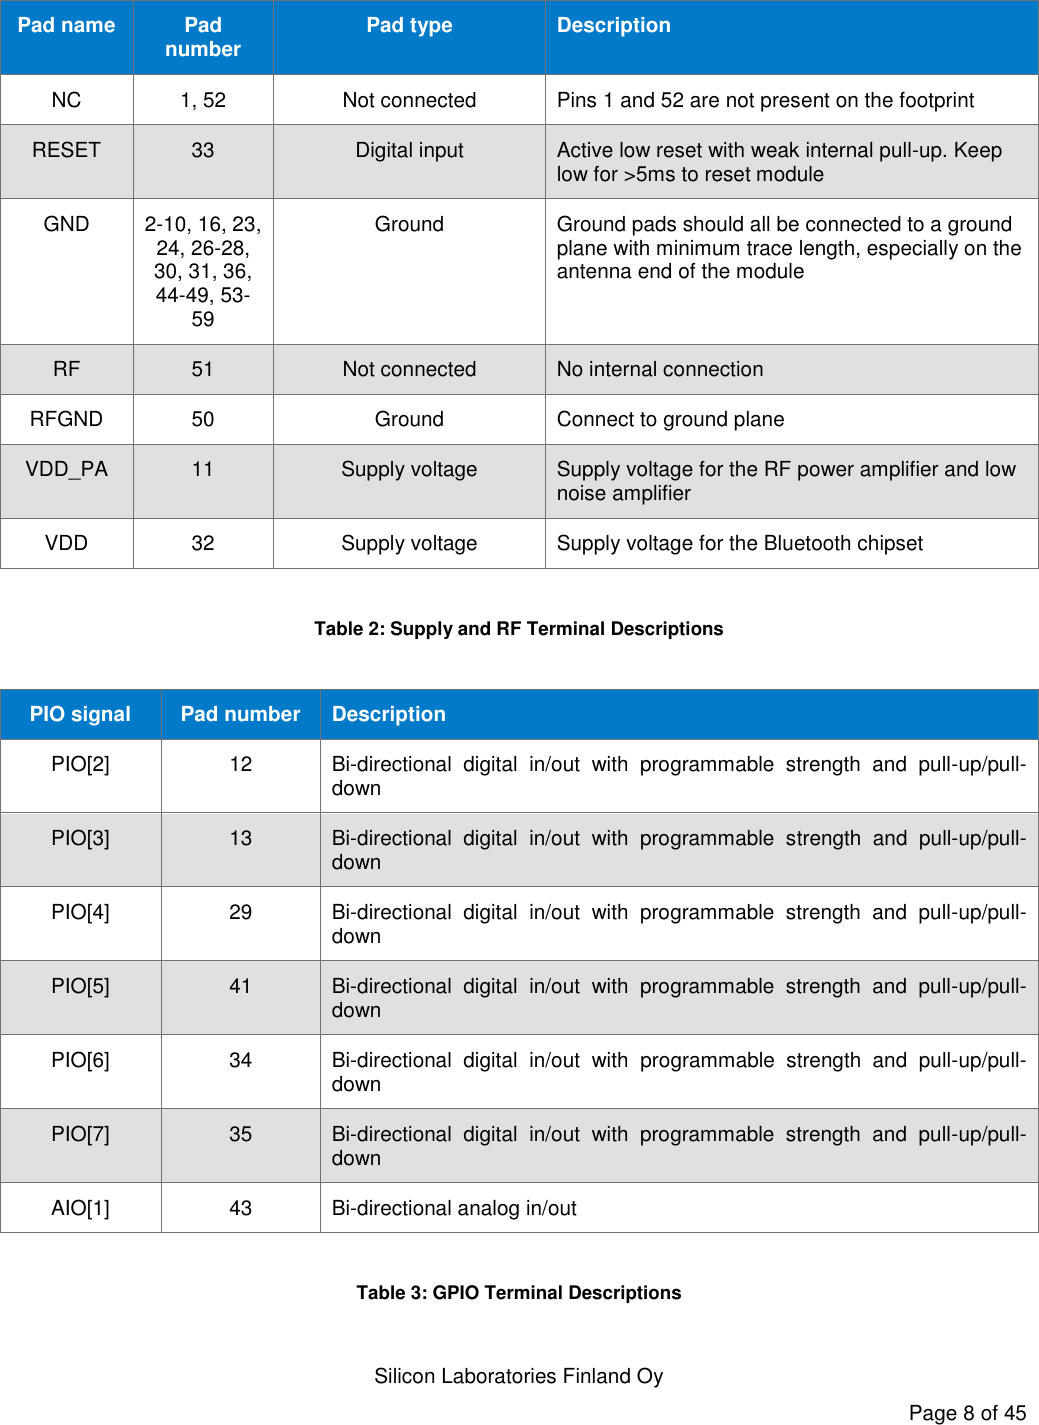   Silicon Laboratories Finland Oy Page 8 of 45  Pad name Pad number Pad type Description NC 1, 52 Not connected Pins 1 and 52 are not present on the footprint RESET 33 Digital input Active low reset with weak internal pull-up. Keep low for &gt;5ms to reset module GND 2-10, 16, 23, 24, 26-28, 30, 31, 36, 44-49, 53-59 Ground Ground pads should all be connected to a ground plane with minimum trace length, especially on the antenna end of the module RF 51 Not connected No internal connection RFGND 50 Ground Connect to ground plane VDD_PA 11 Supply voltage Supply voltage for the RF power amplifier and low noise amplifier VDD 32 Supply voltage Supply voltage for the Bluetooth chipset  Table 2: Supply and RF Terminal Descriptions  PIO signal Pad number Description PIO[2] 12 Bi-directional  digital  in/out  with  programmable  strength  and  pull-up/pull-down PIO[3] 13 Bi-directional  digital  in/out  with  programmable  strength  and  pull-up/pull-down PIO[4] 29 Bi-directional  digital  in/out  with  programmable  strength  and  pull-up/pull-down PIO[5] 41 Bi-directional  digital  in/out  with  programmable  strength  and  pull-up/pull-down PIO[6] 34 Bi-directional  digital  in/out  with  programmable  strength  and  pull-up/pull-down PIO[7] 35 Bi-directional  digital  in/out  with  programmable  strength  and  pull-up/pull-down AIO[1] 43 Bi-directional analog in/out  Table 3: GPIO Terminal Descriptions 